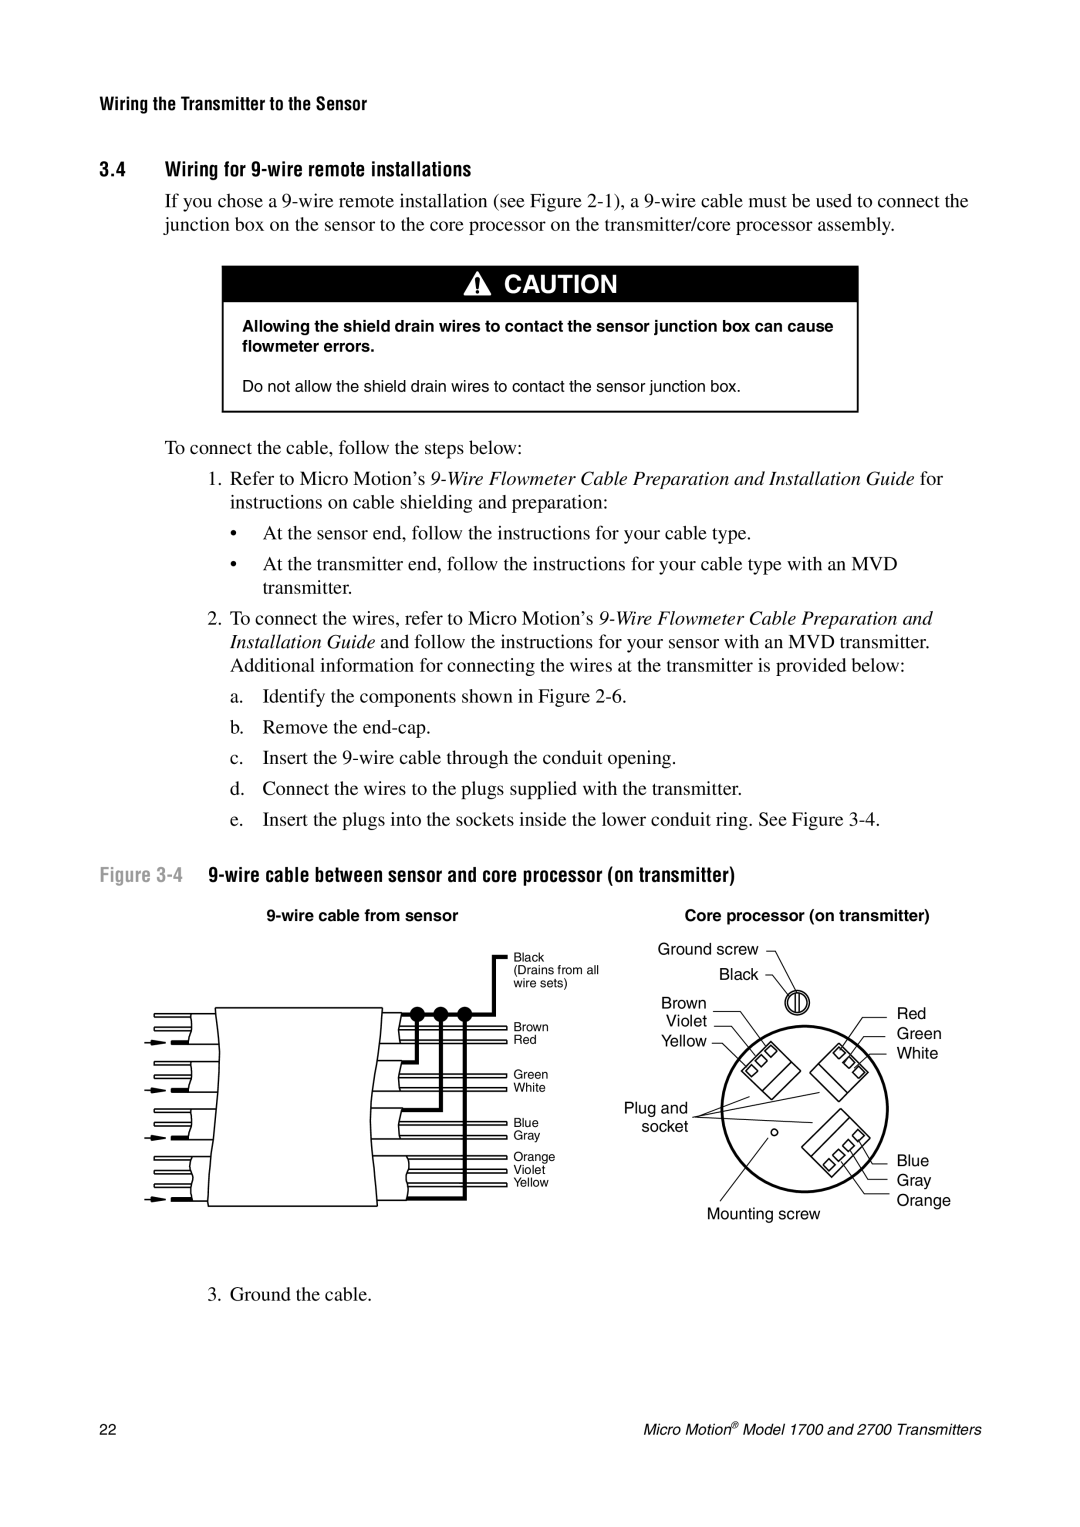 Emerson 1700, 2700 installation manual 3.4Wiring for 9-wireremote installations 